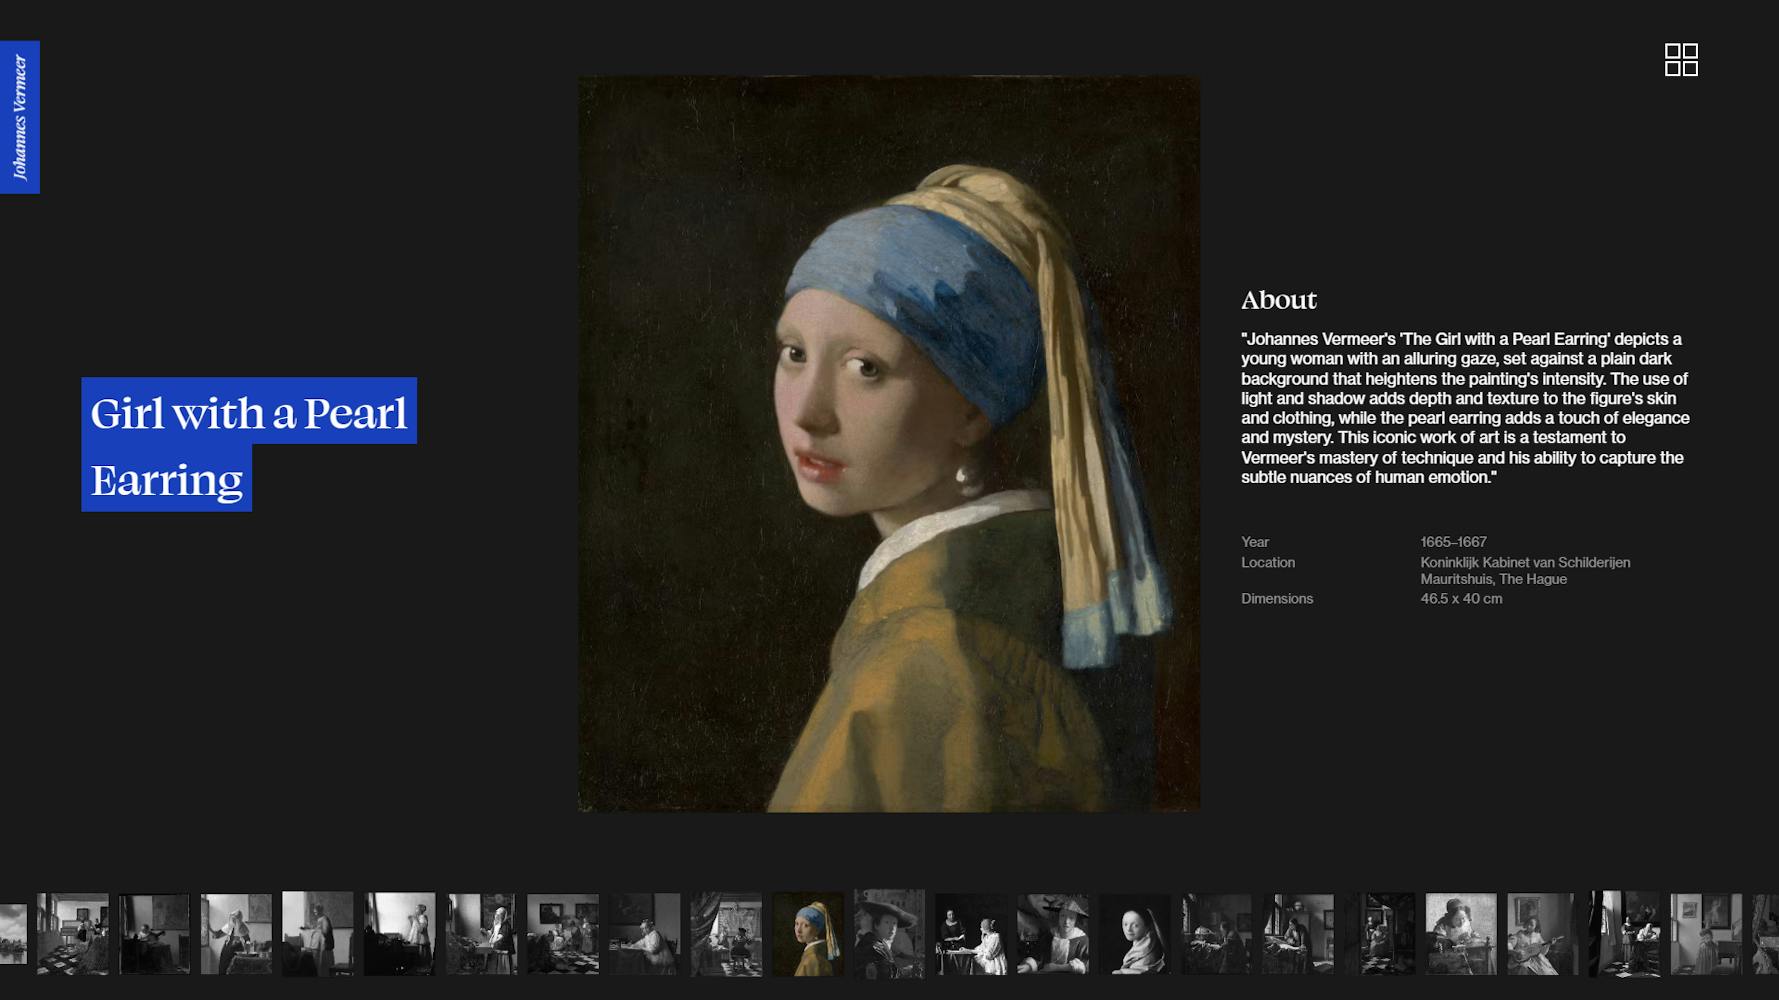 Screenshot of the page that showcases the painting "The girl with a pearl earring"